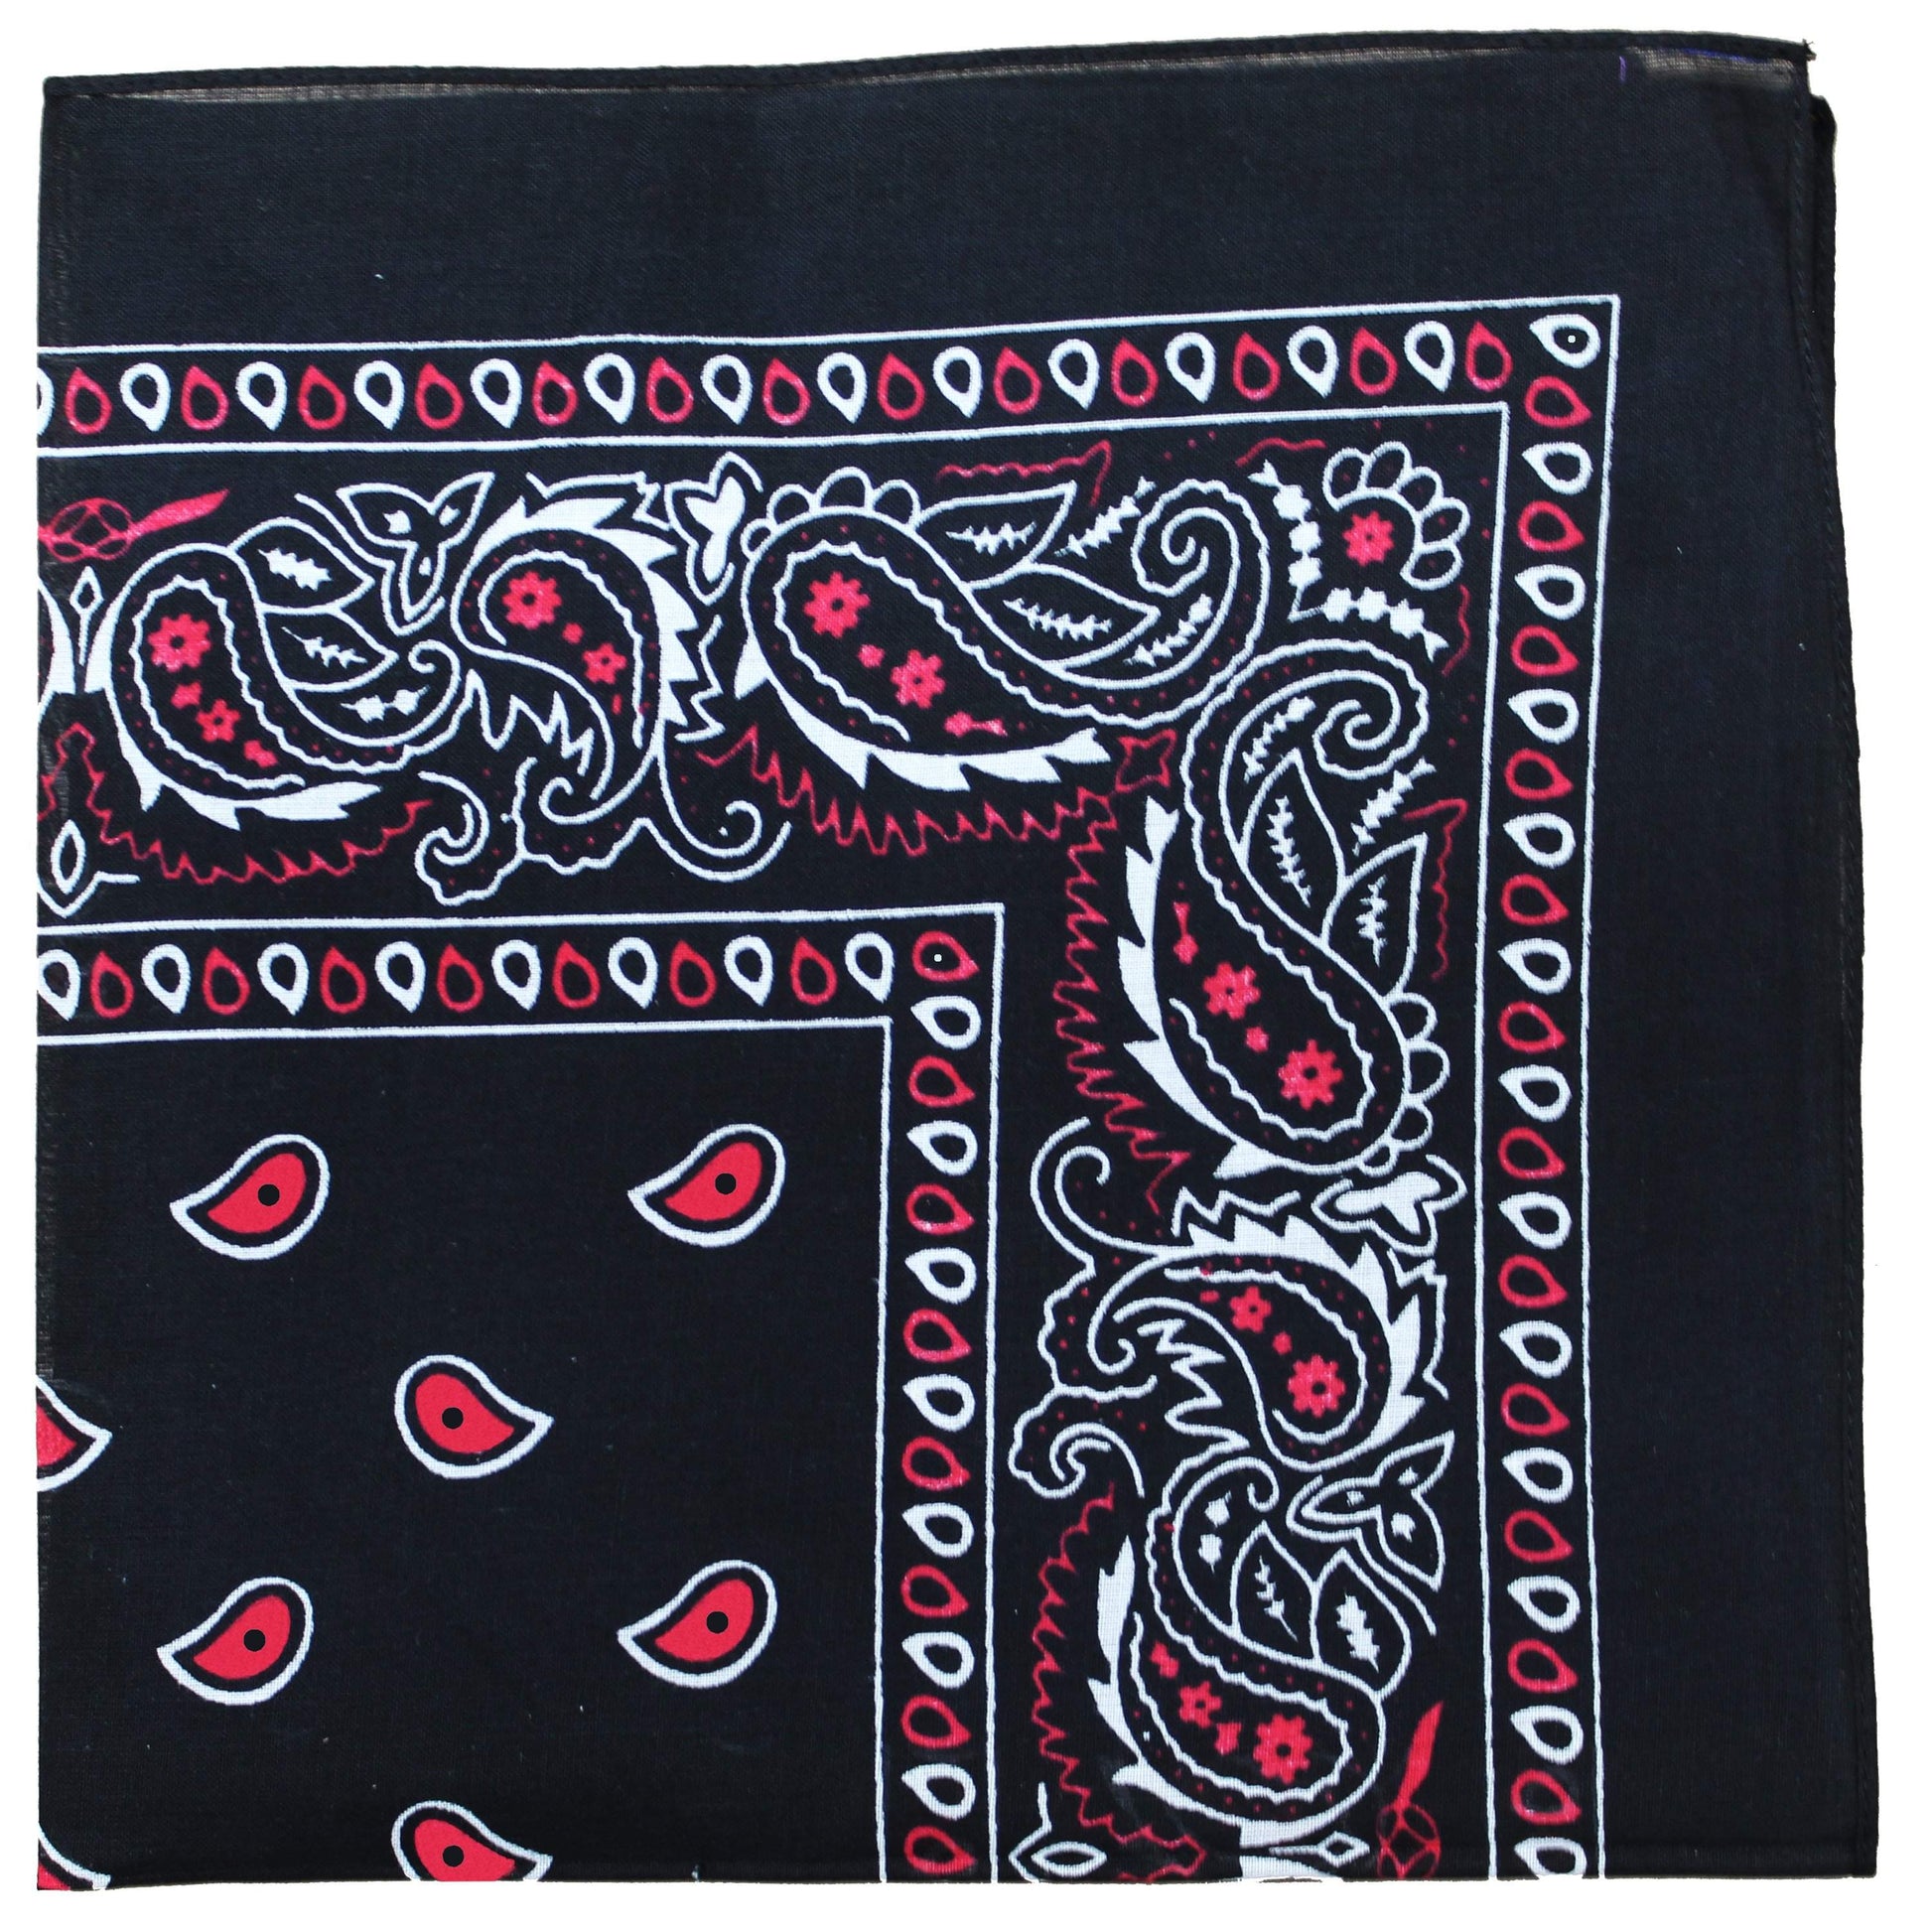 Made in the USA Black and Red Paisley Bandana 100% Cotton 22 X 22 